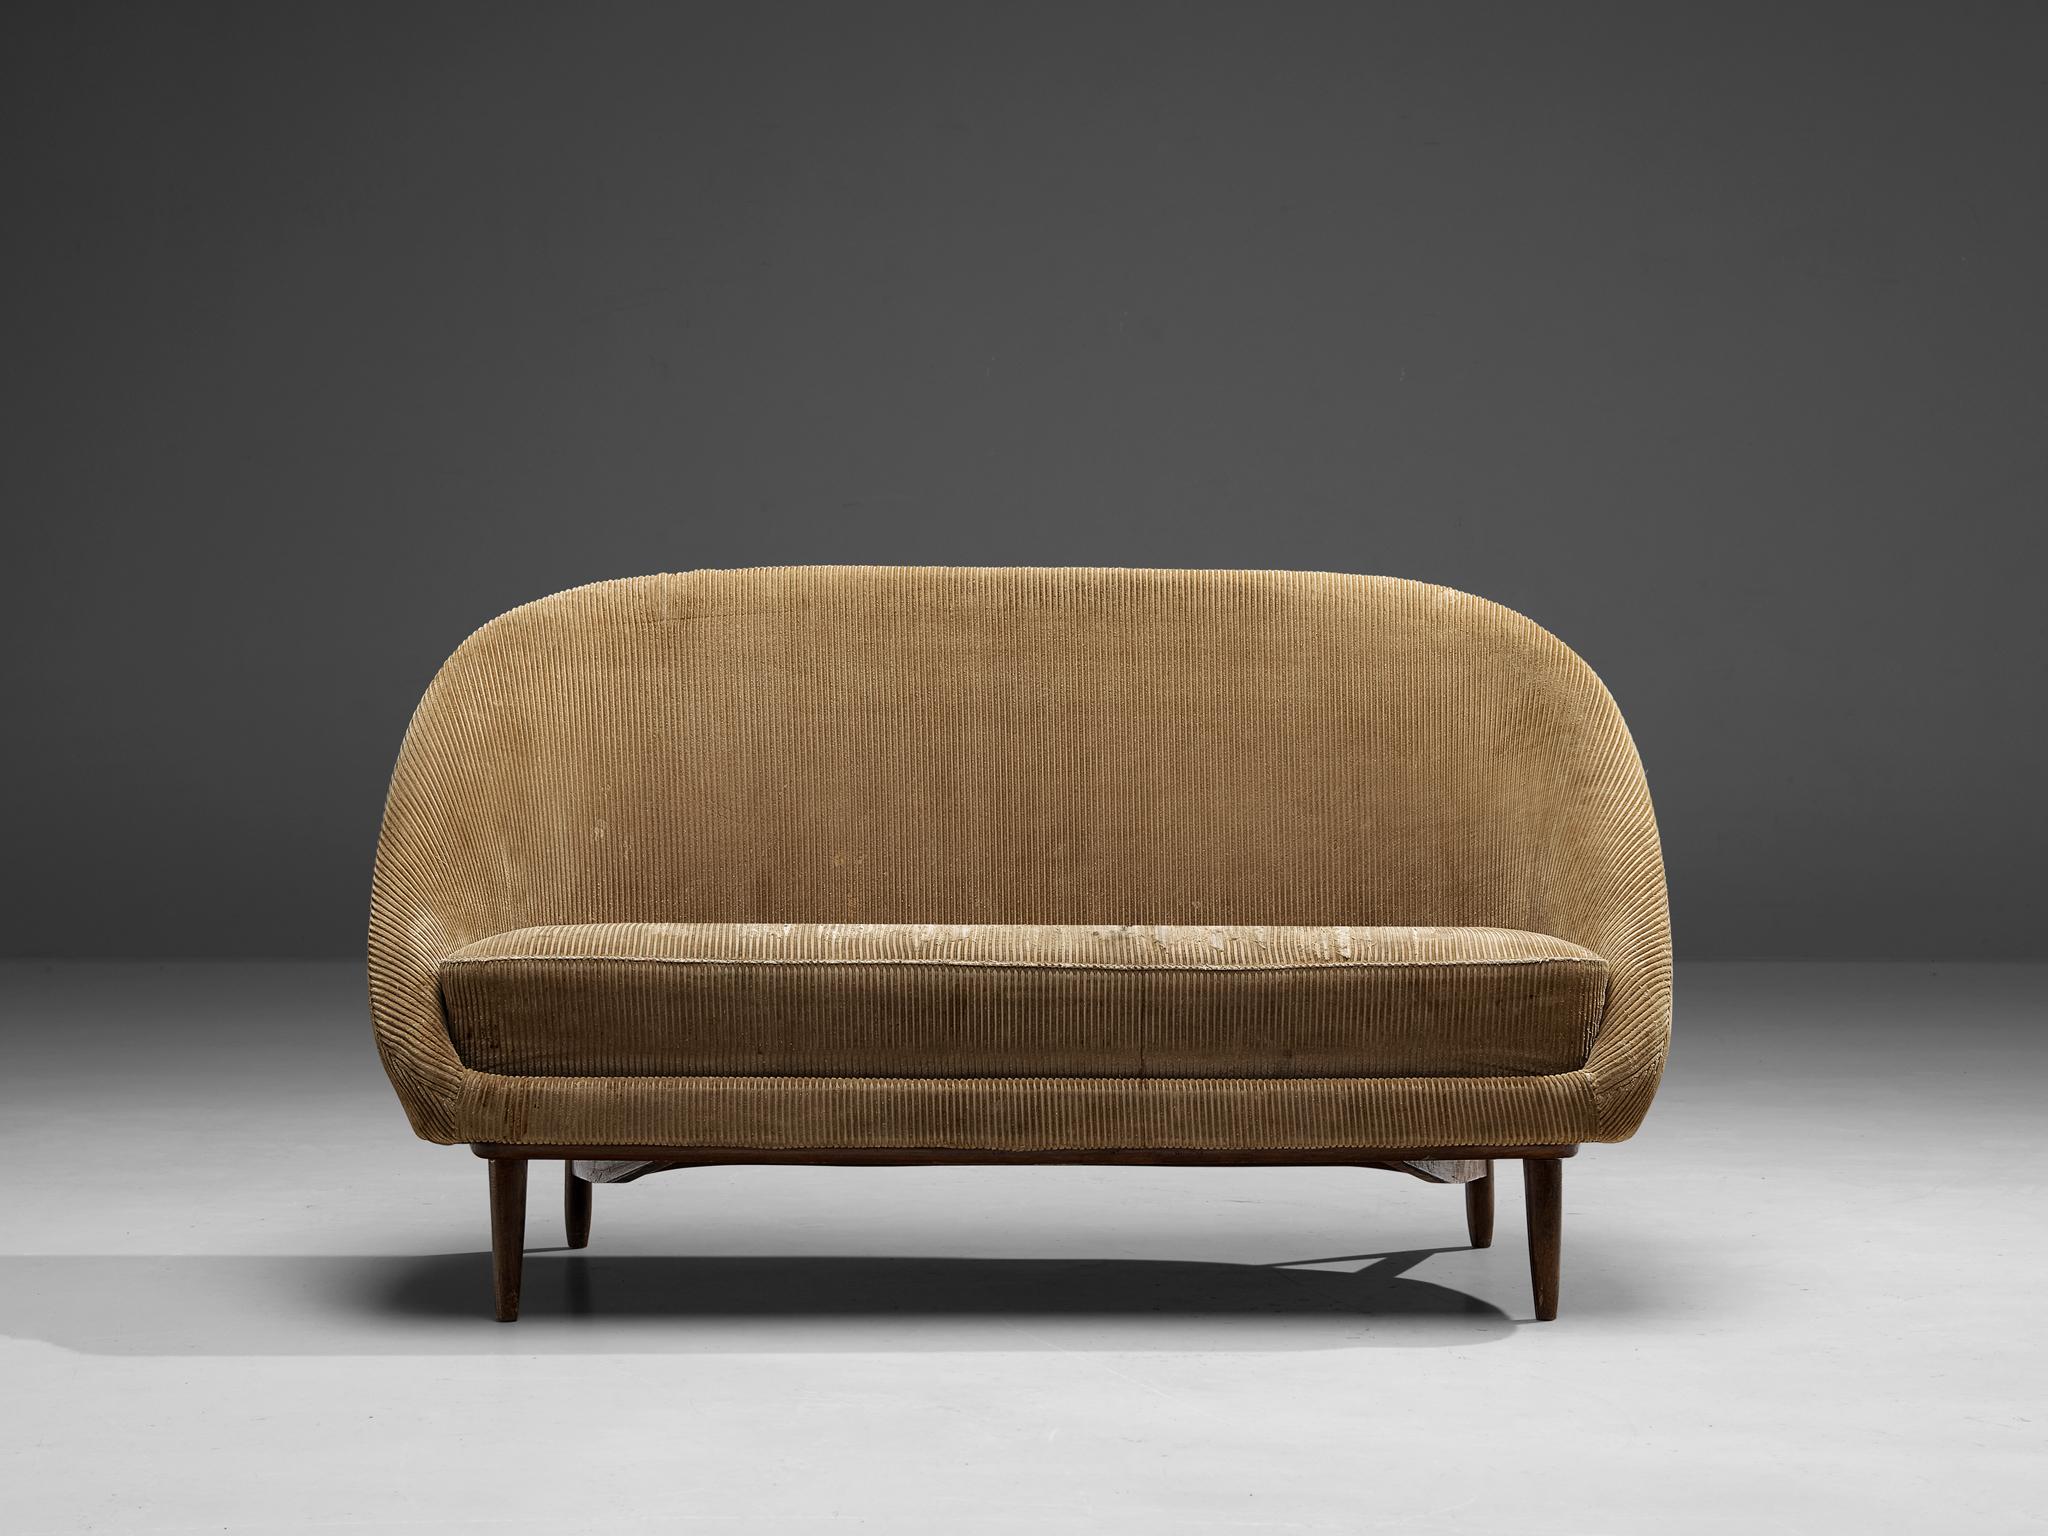 Theo Ruth for Artifort, sofa, fabric, wood, Netherlands, 1970. 

A Dutch settee in beige corduroy upholstery by Theo Ruth. The back tilts slightly backward and has the recognizable natural flow and feel of Ruth's design. The frame of the sofa is